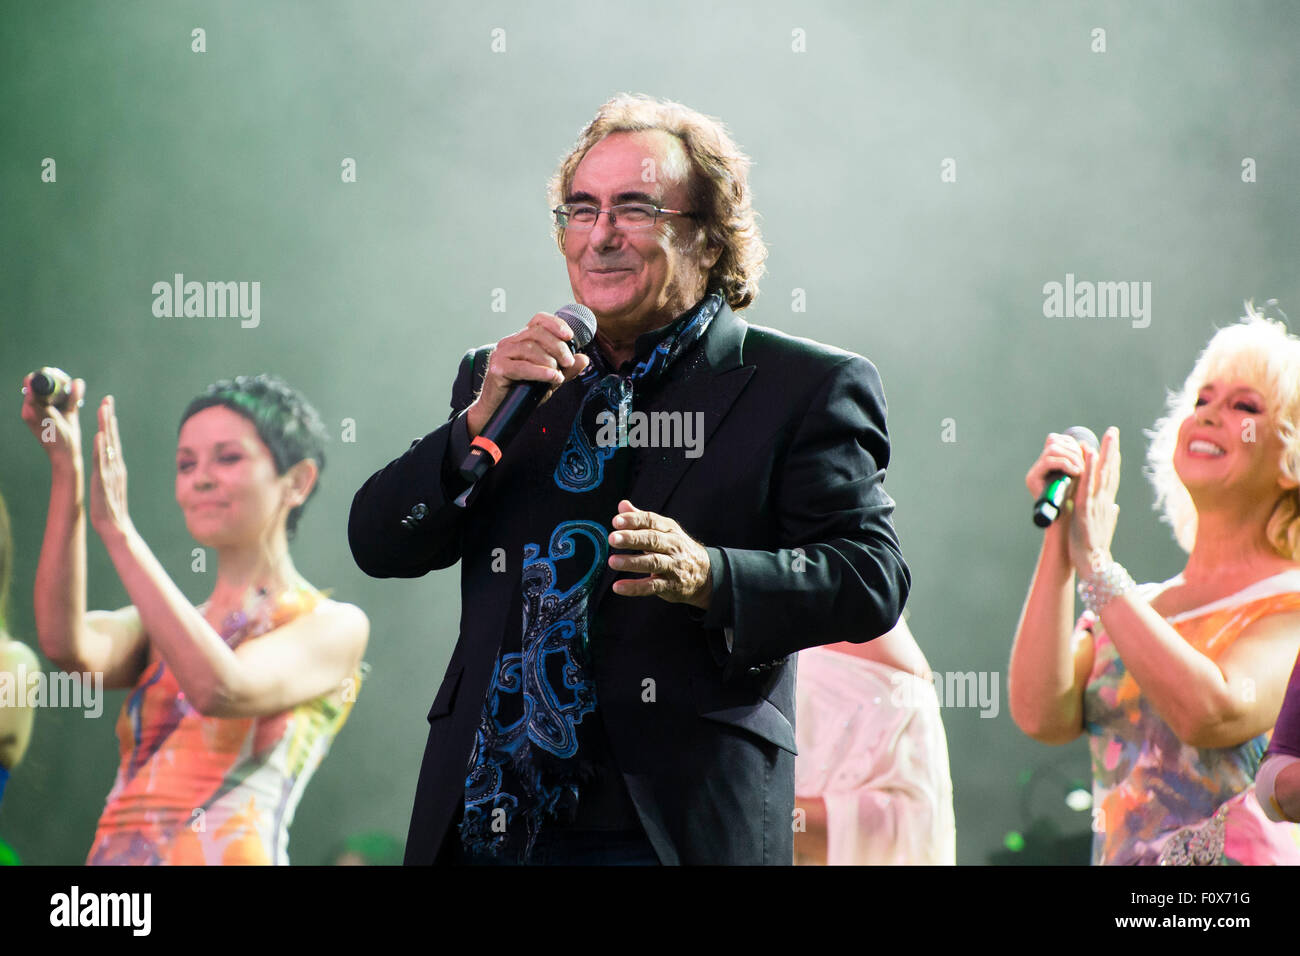 Berlin, Germany. 21st Aug, 2015. Albano Carrisi (Al Bano) performs on stage during a concert in Berlin, Germany, 21 August 2015. The concert of the singing duo Al Bano and Romina Power was their first in the German-speaking region in 20 years. Photo: Gregor Fischer/dpa/Alamy Live News Stock Photo